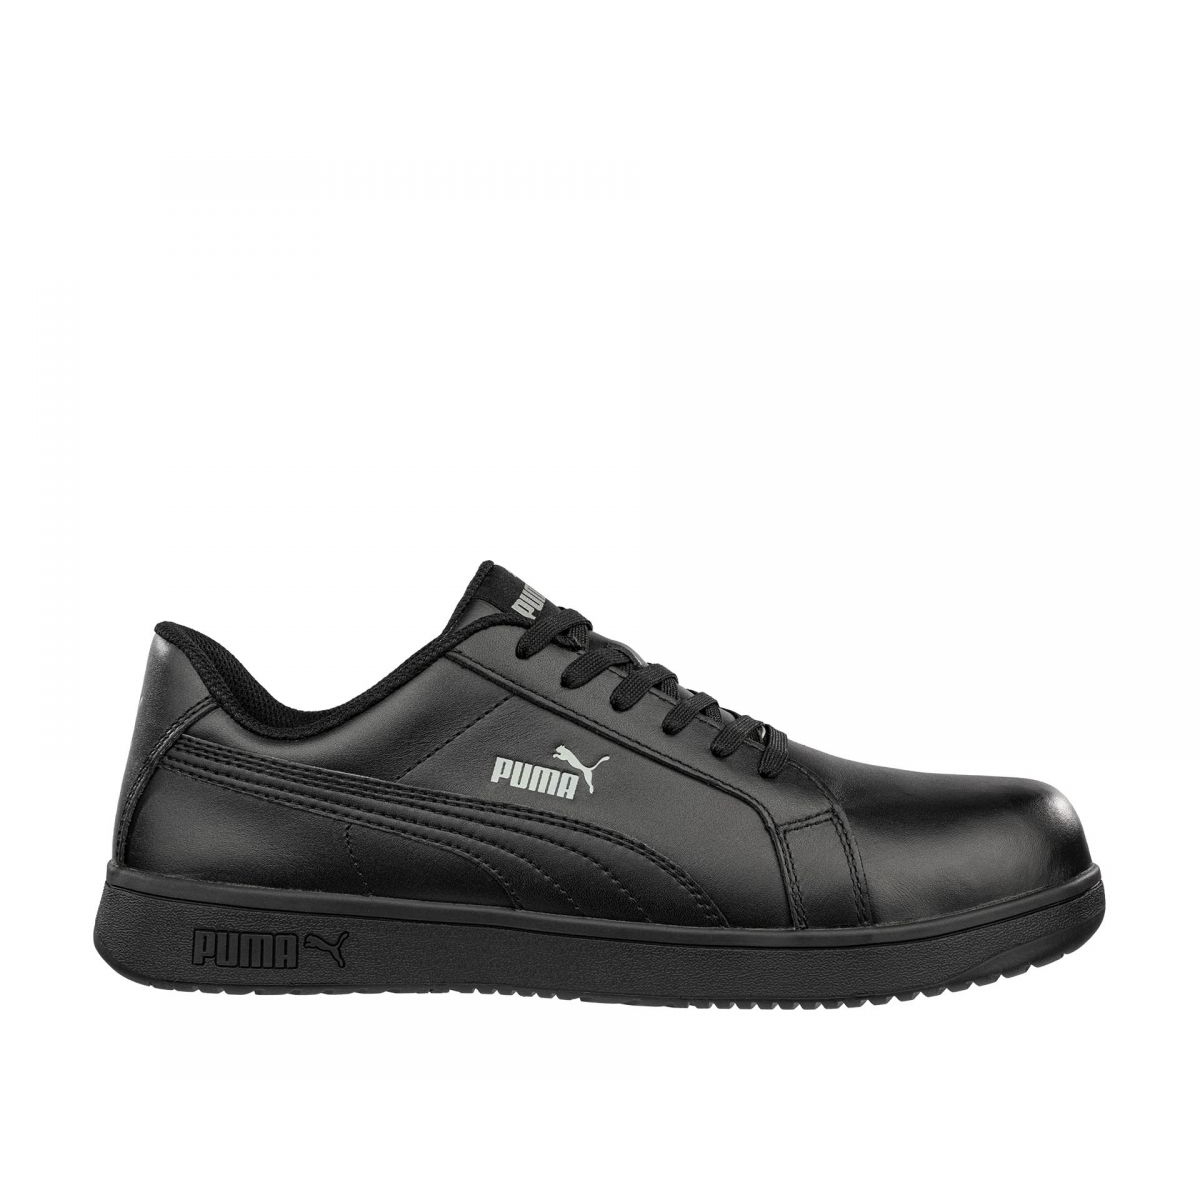 PUMA Safety Women's Iconic Low Composite Toe SD Work Shoes Smooth Black Leather - 640105 BLACK - BLACK, 8.5